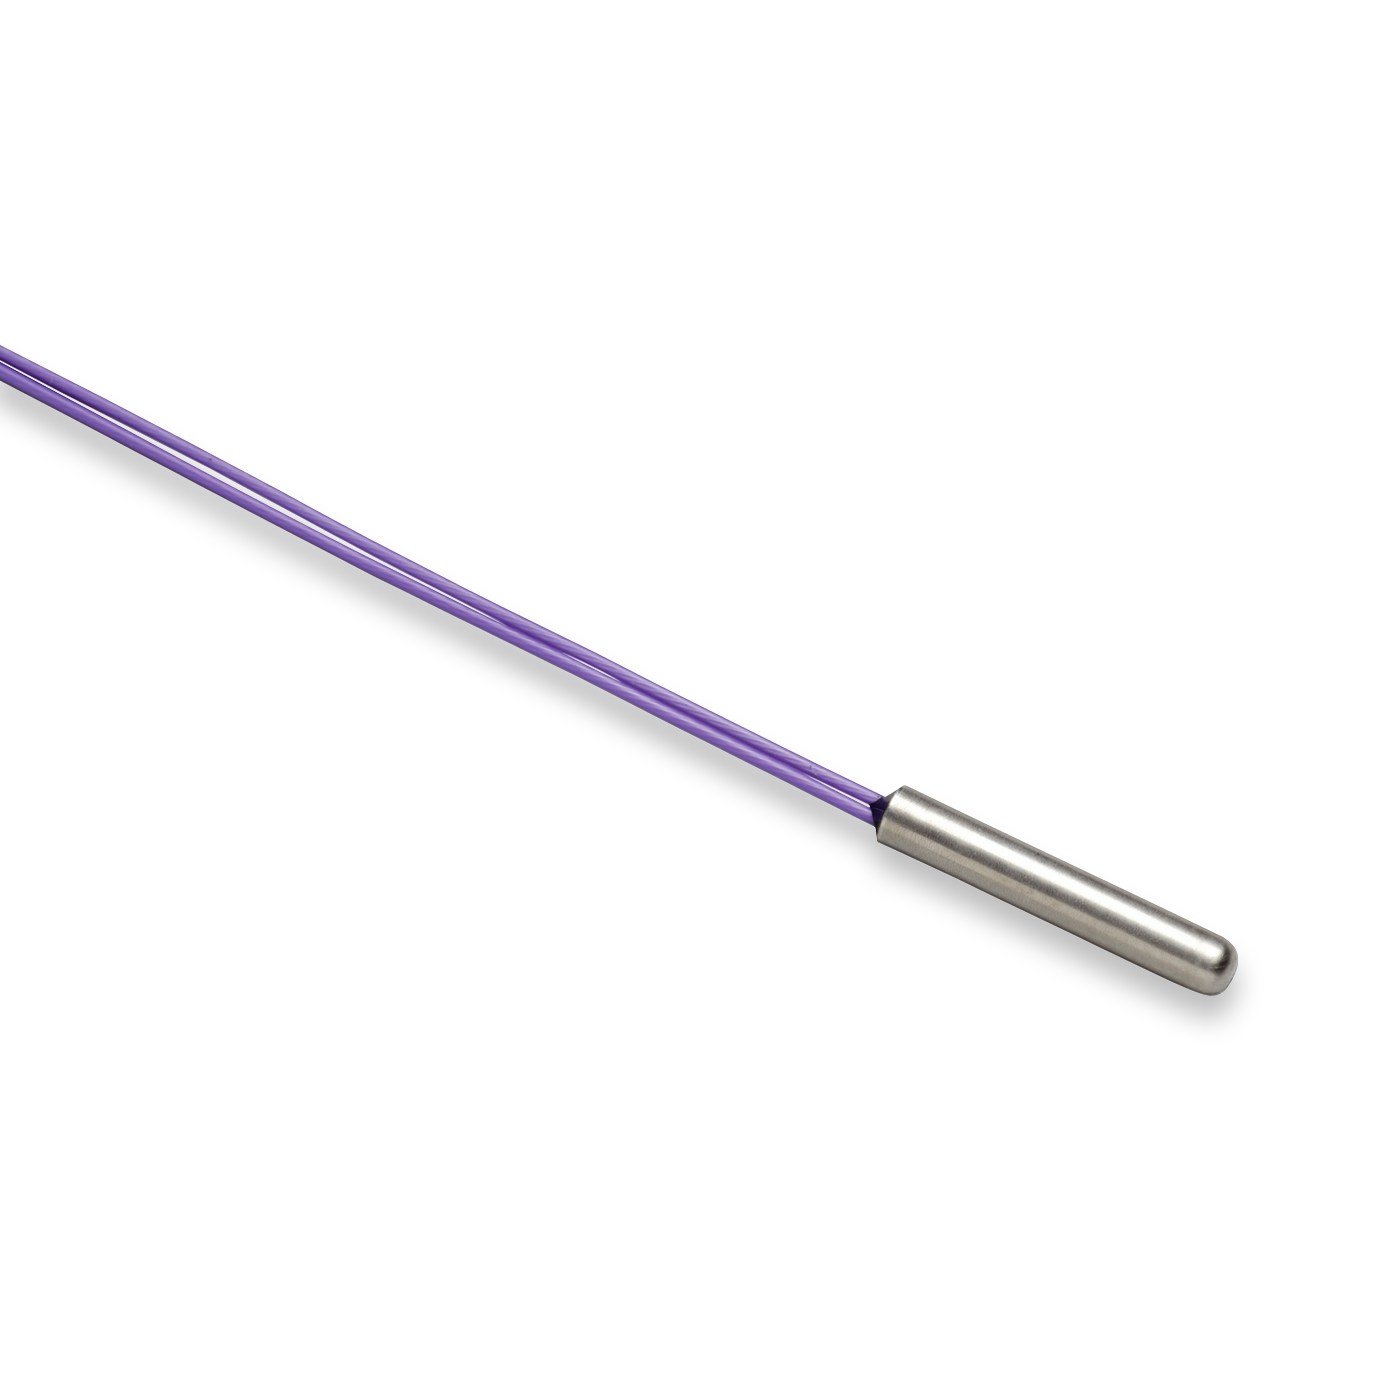 USP11492 - USP11492 Series - Straight from Thermistor Probes and 